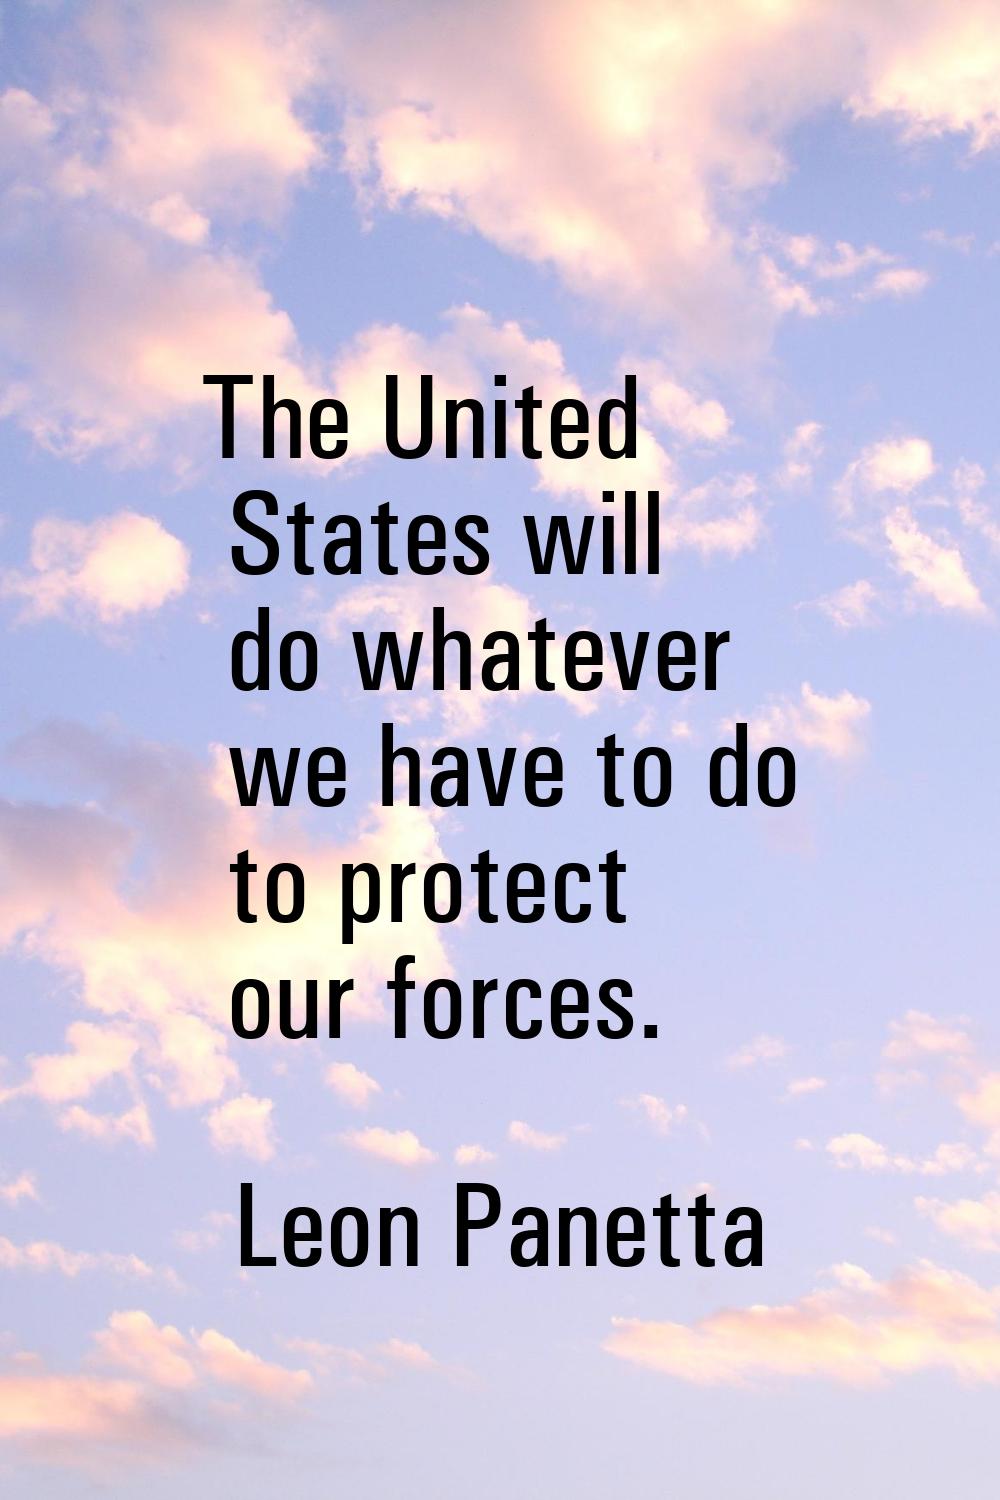 The United States will do whatever we have to do to protect our forces.